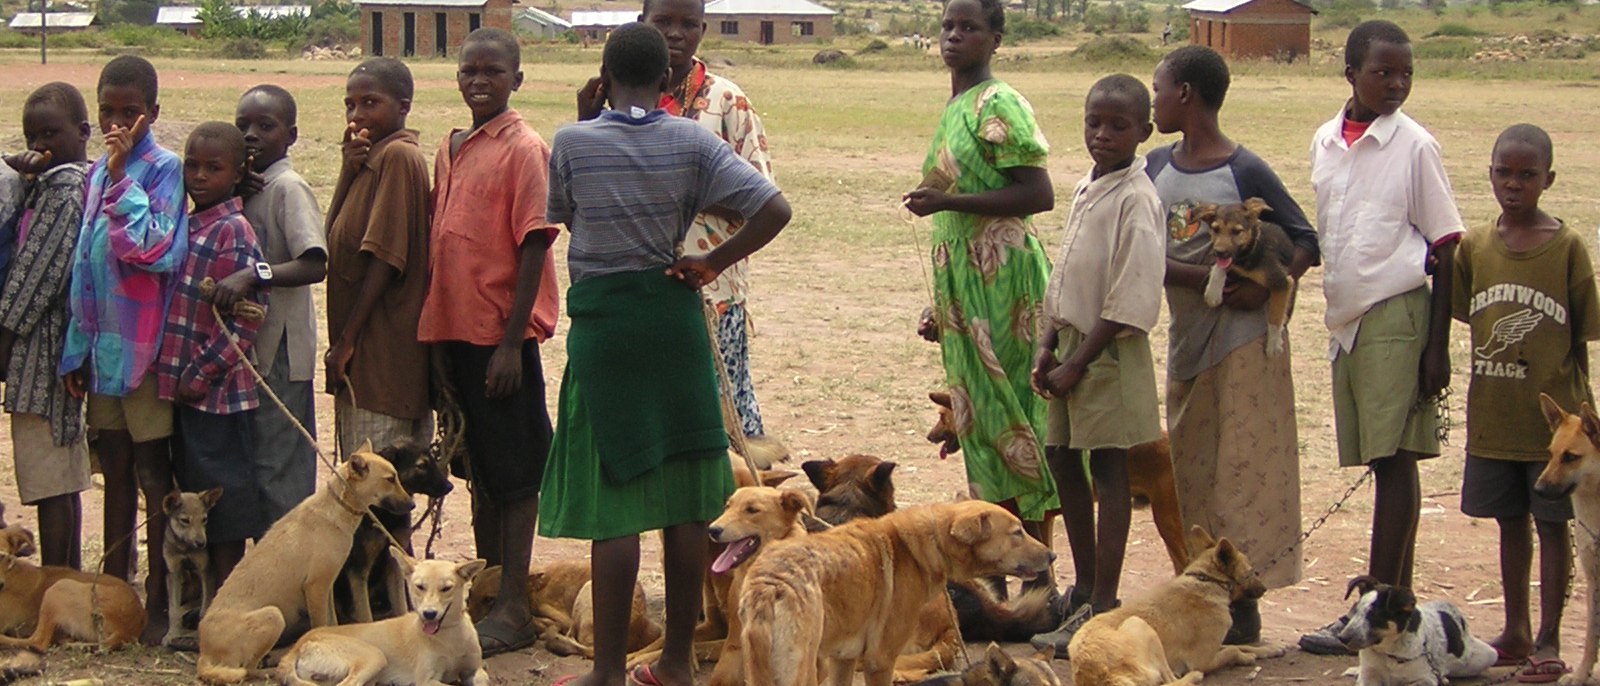 Line-up of people and dogs waiting to have their dogs vaccinated against rabies